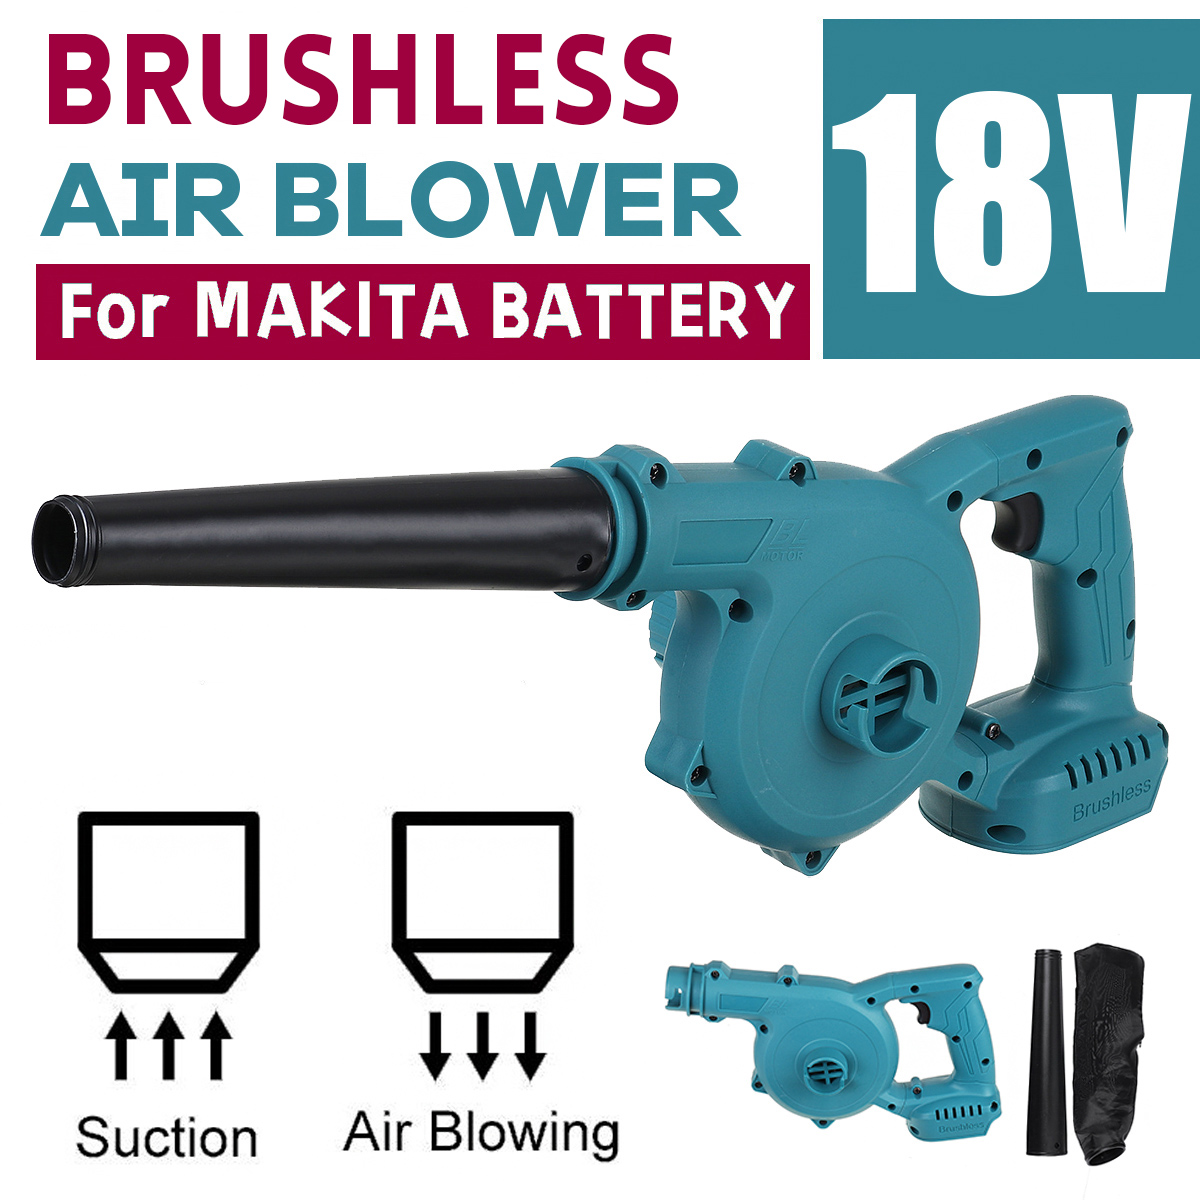 2-In-1-Brushless-Electric-Air-Blower--Vacuum-Suction-Dust-Cleaner-Leaf-Blower-For-Makita-18V-Battery-1860997-1